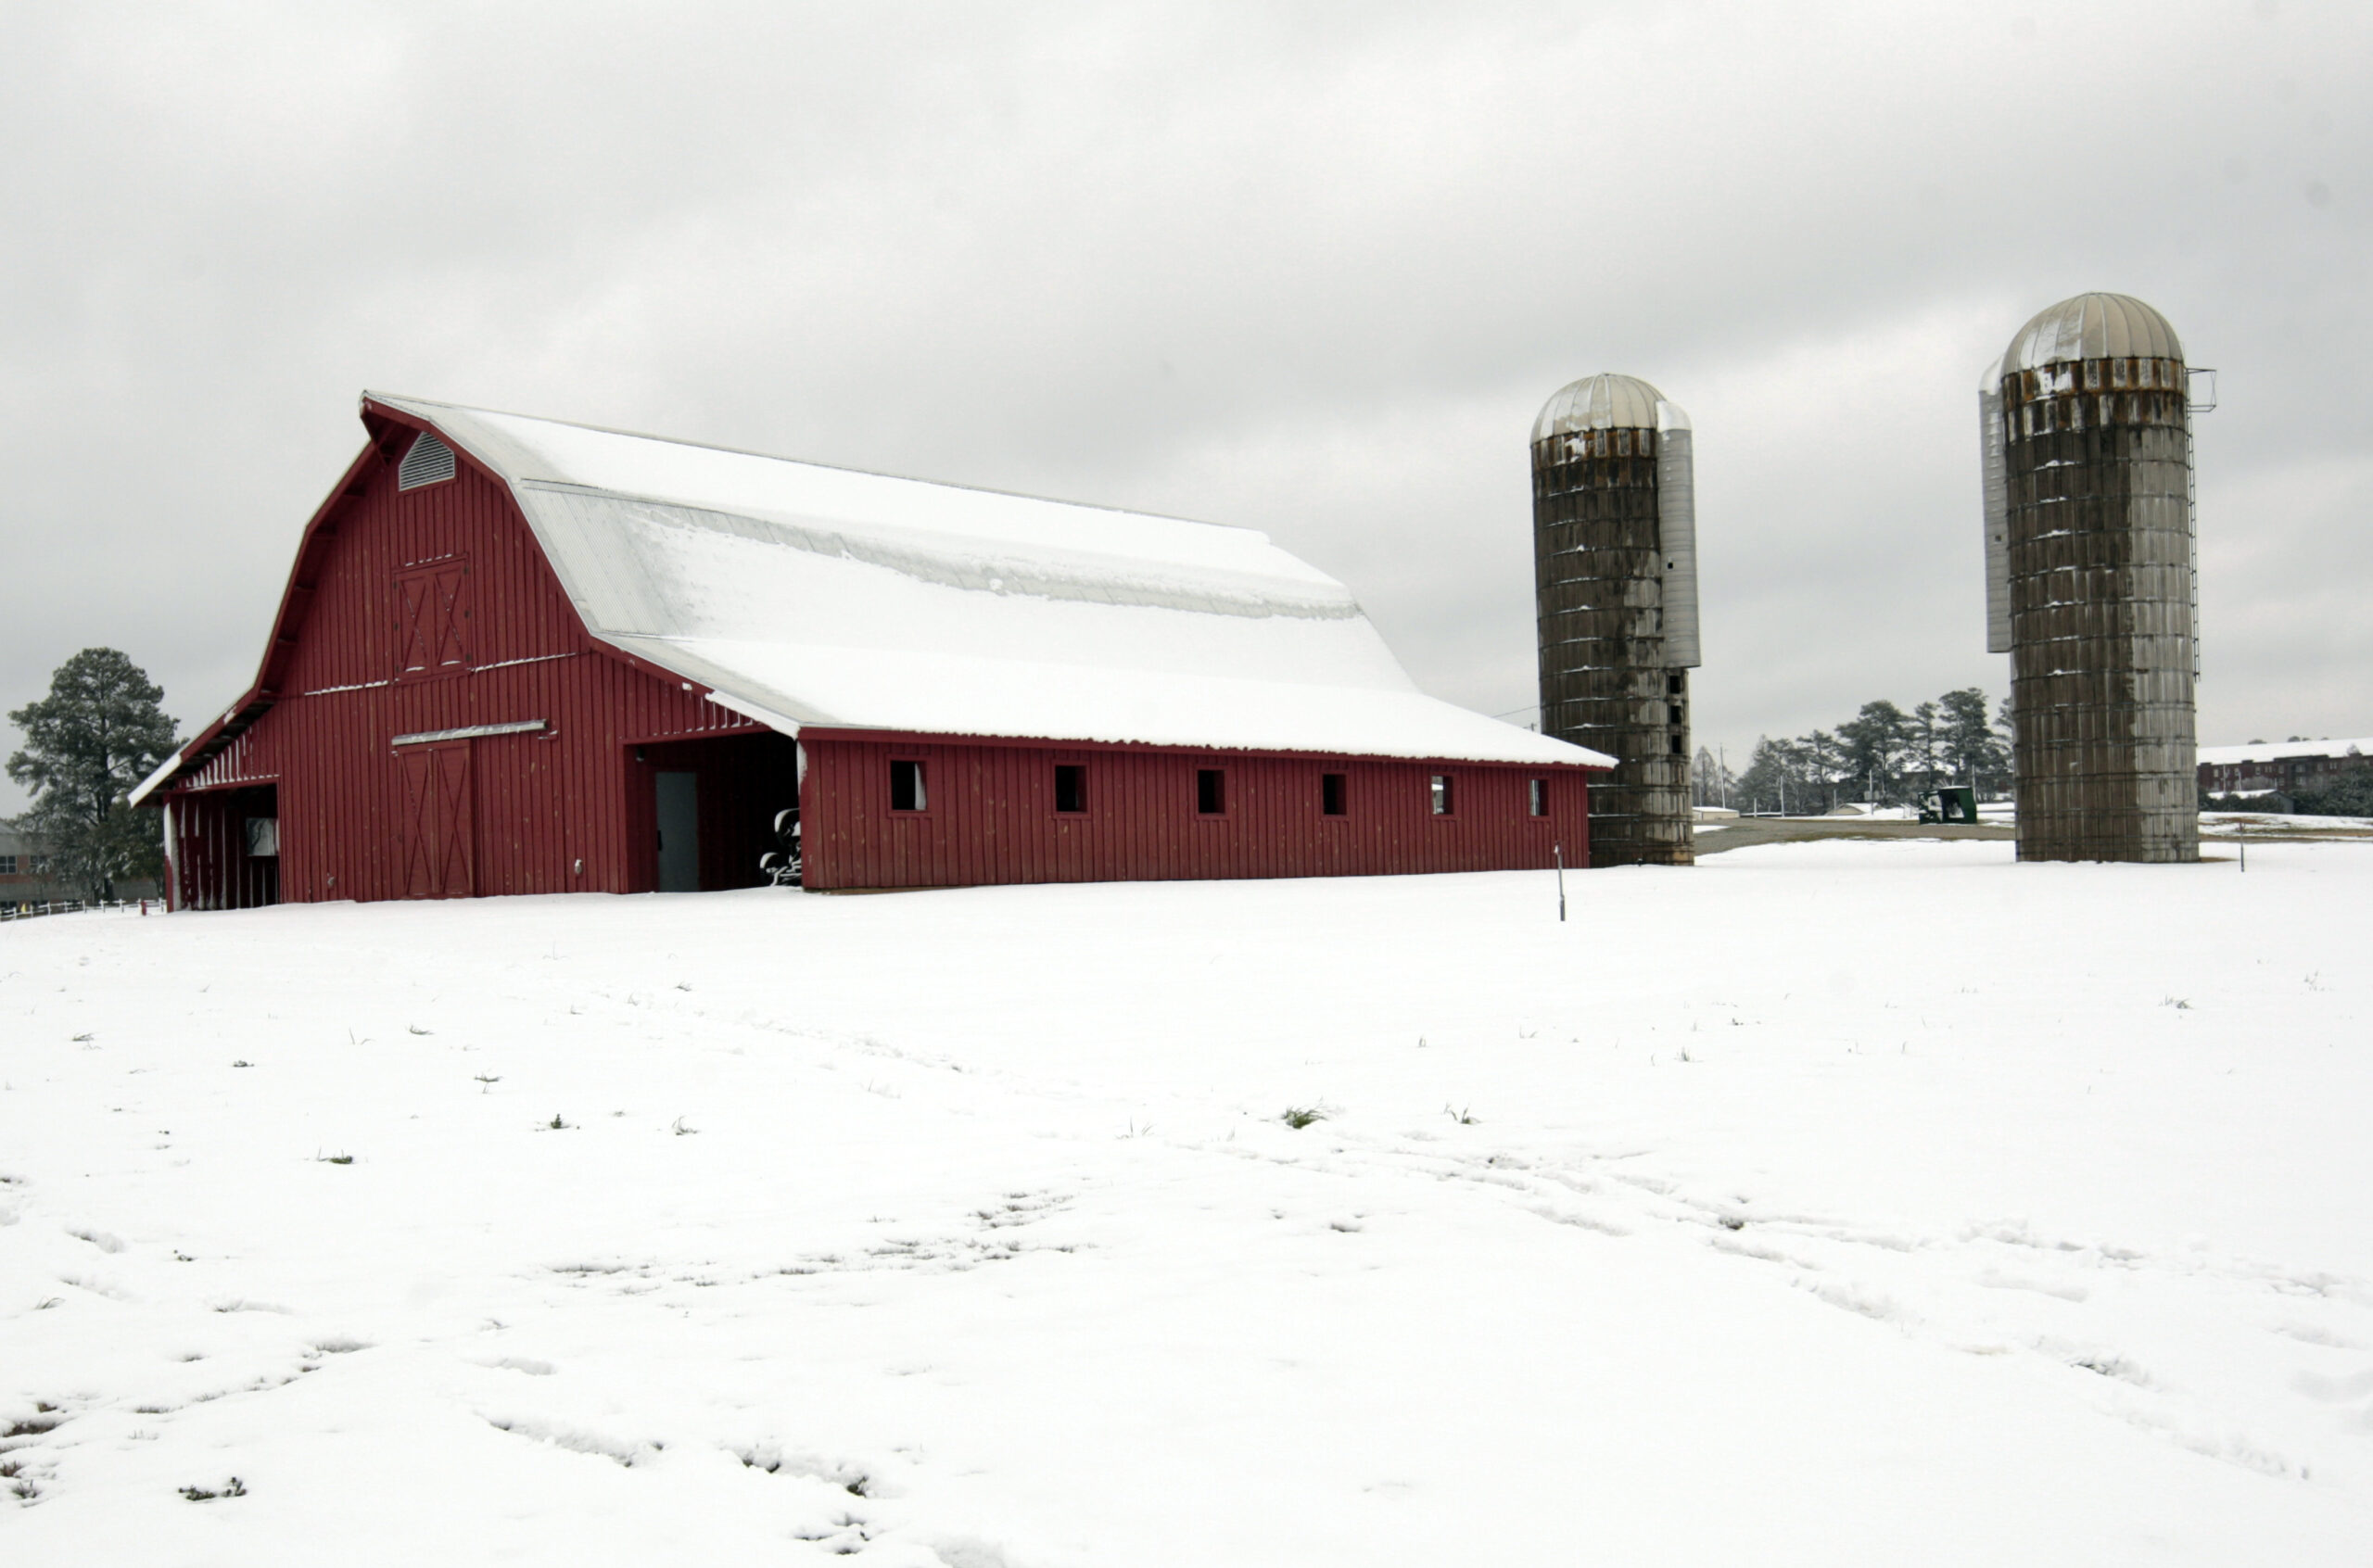 Red barn in snow